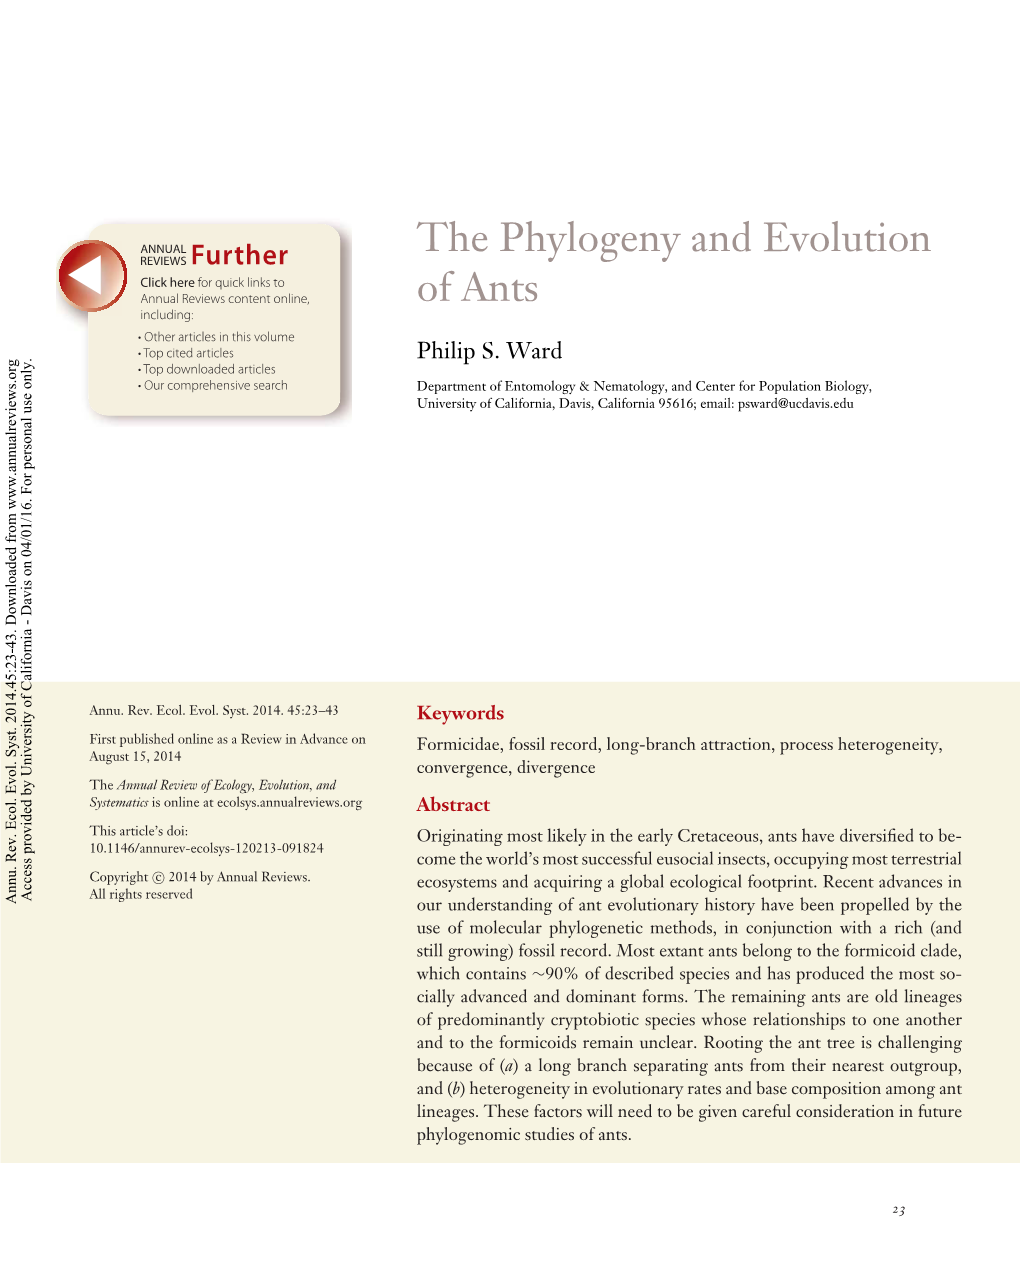 The Phylogeny and Evolution of Ants